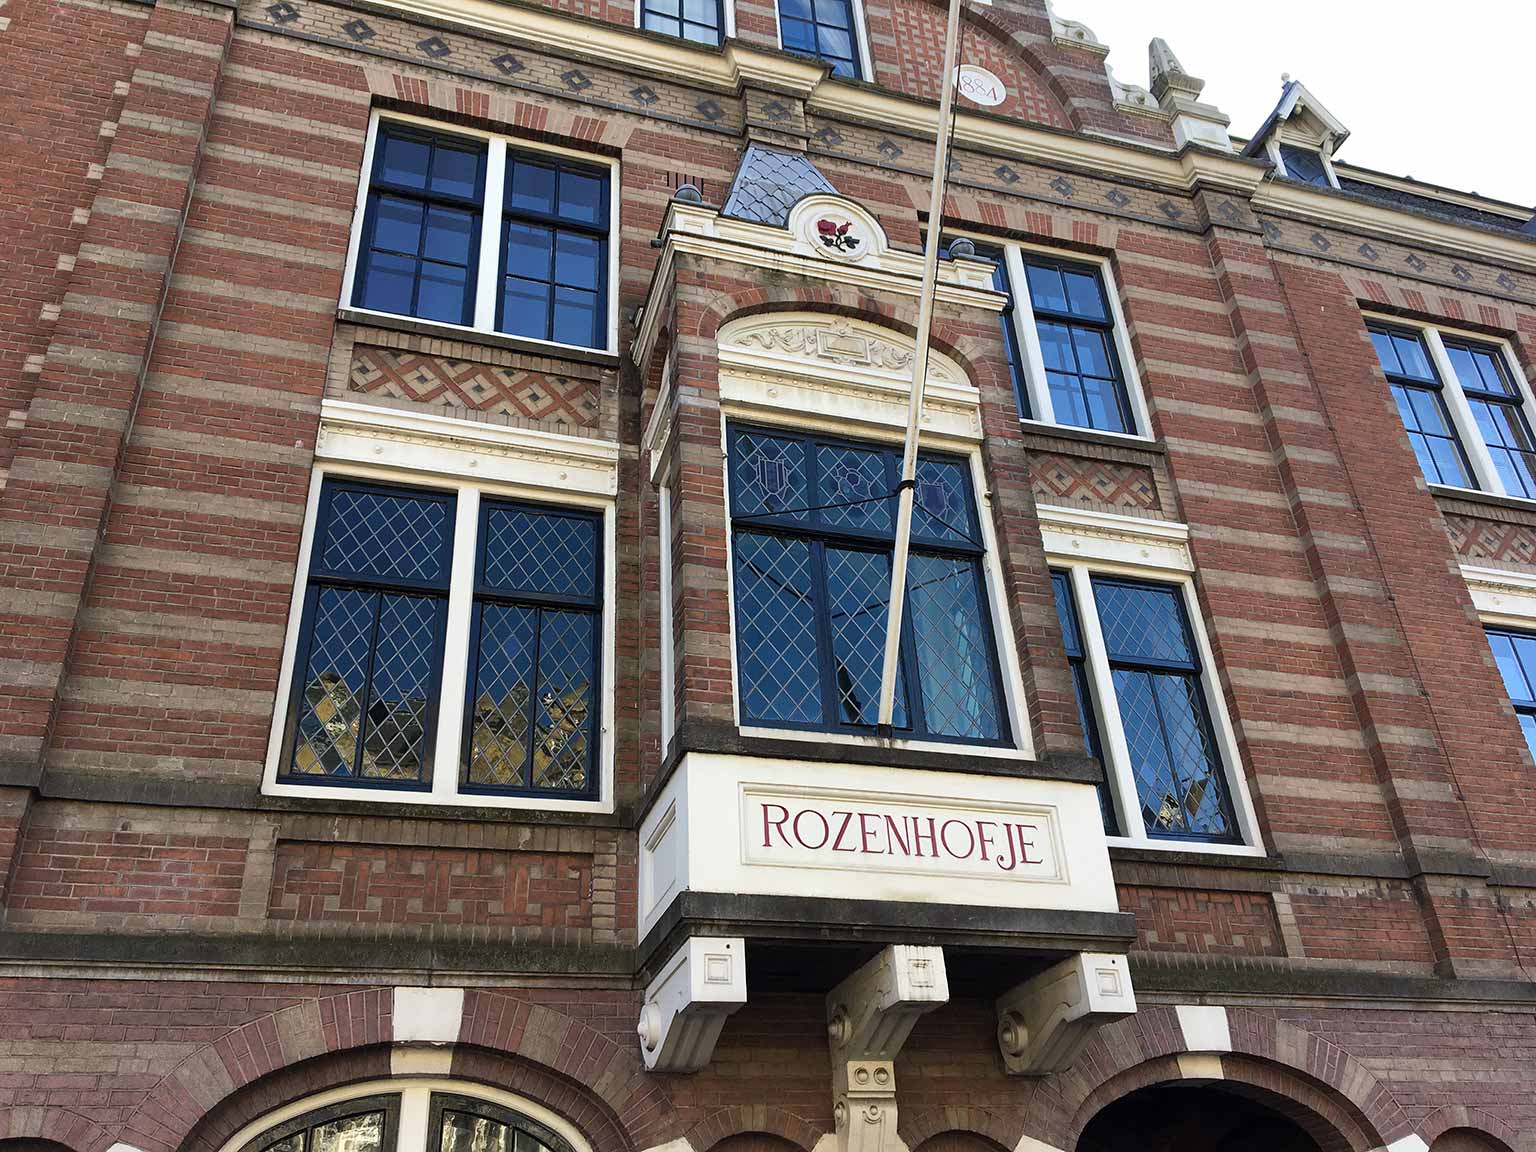 Detail of the front of the Rozenhofje, Rozengracht, Amsterdam